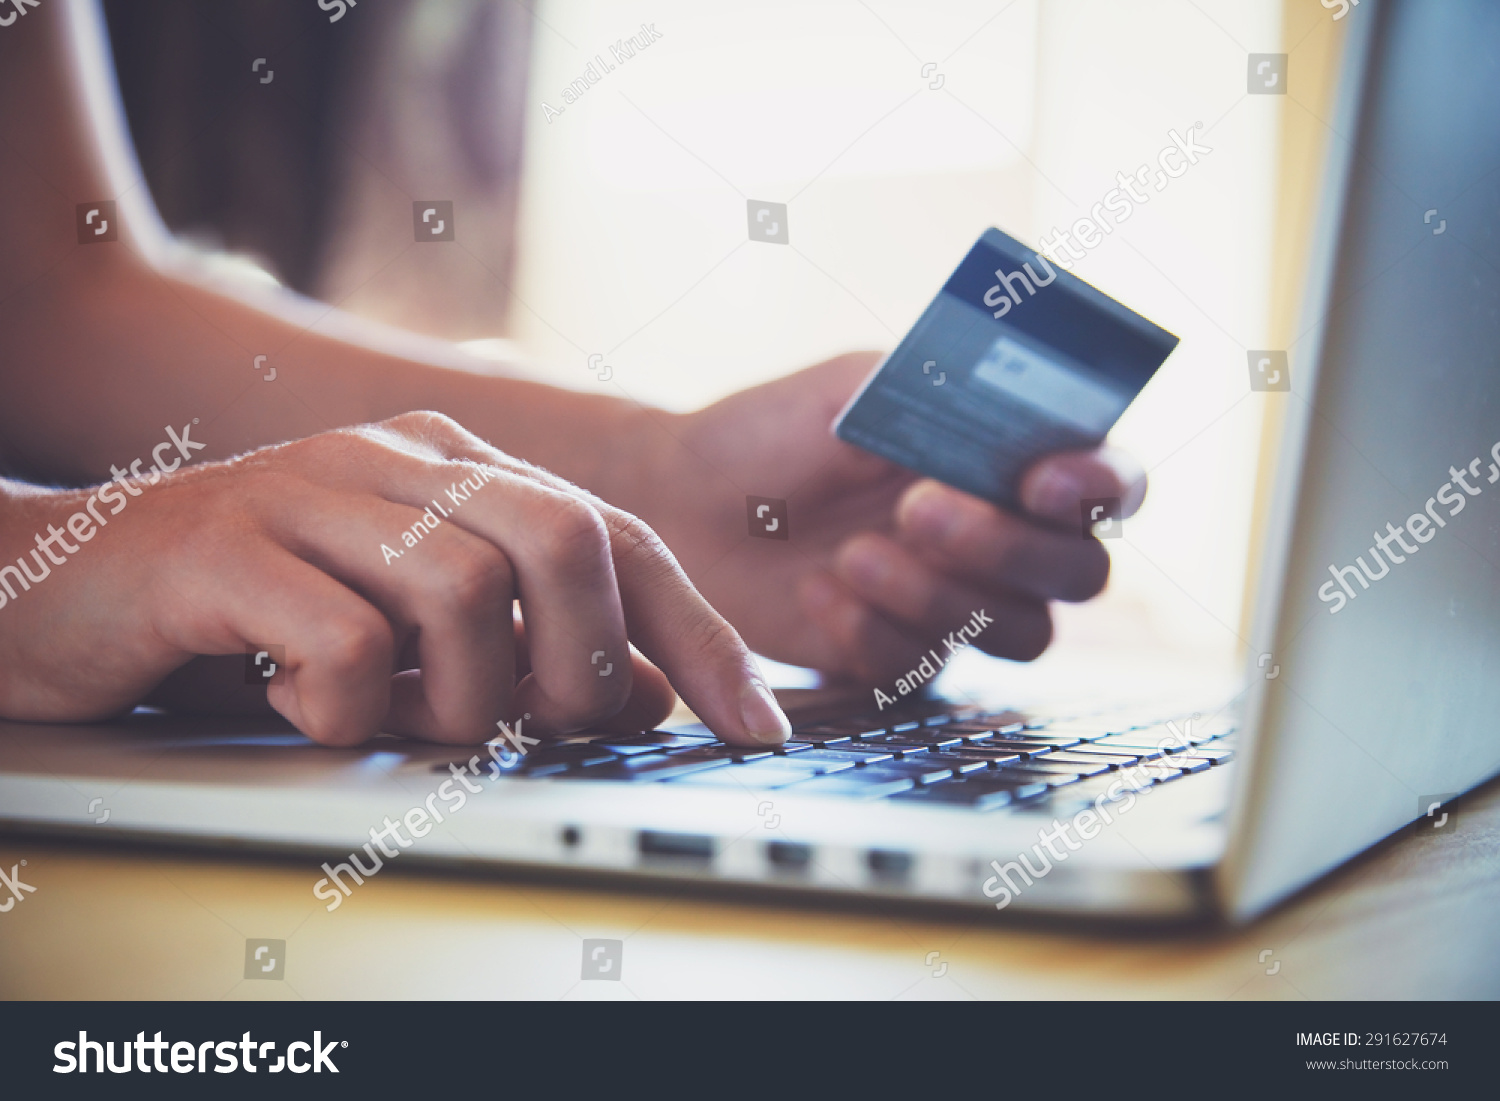 Hands holding credit card and using laptop. Online shopping #291627674